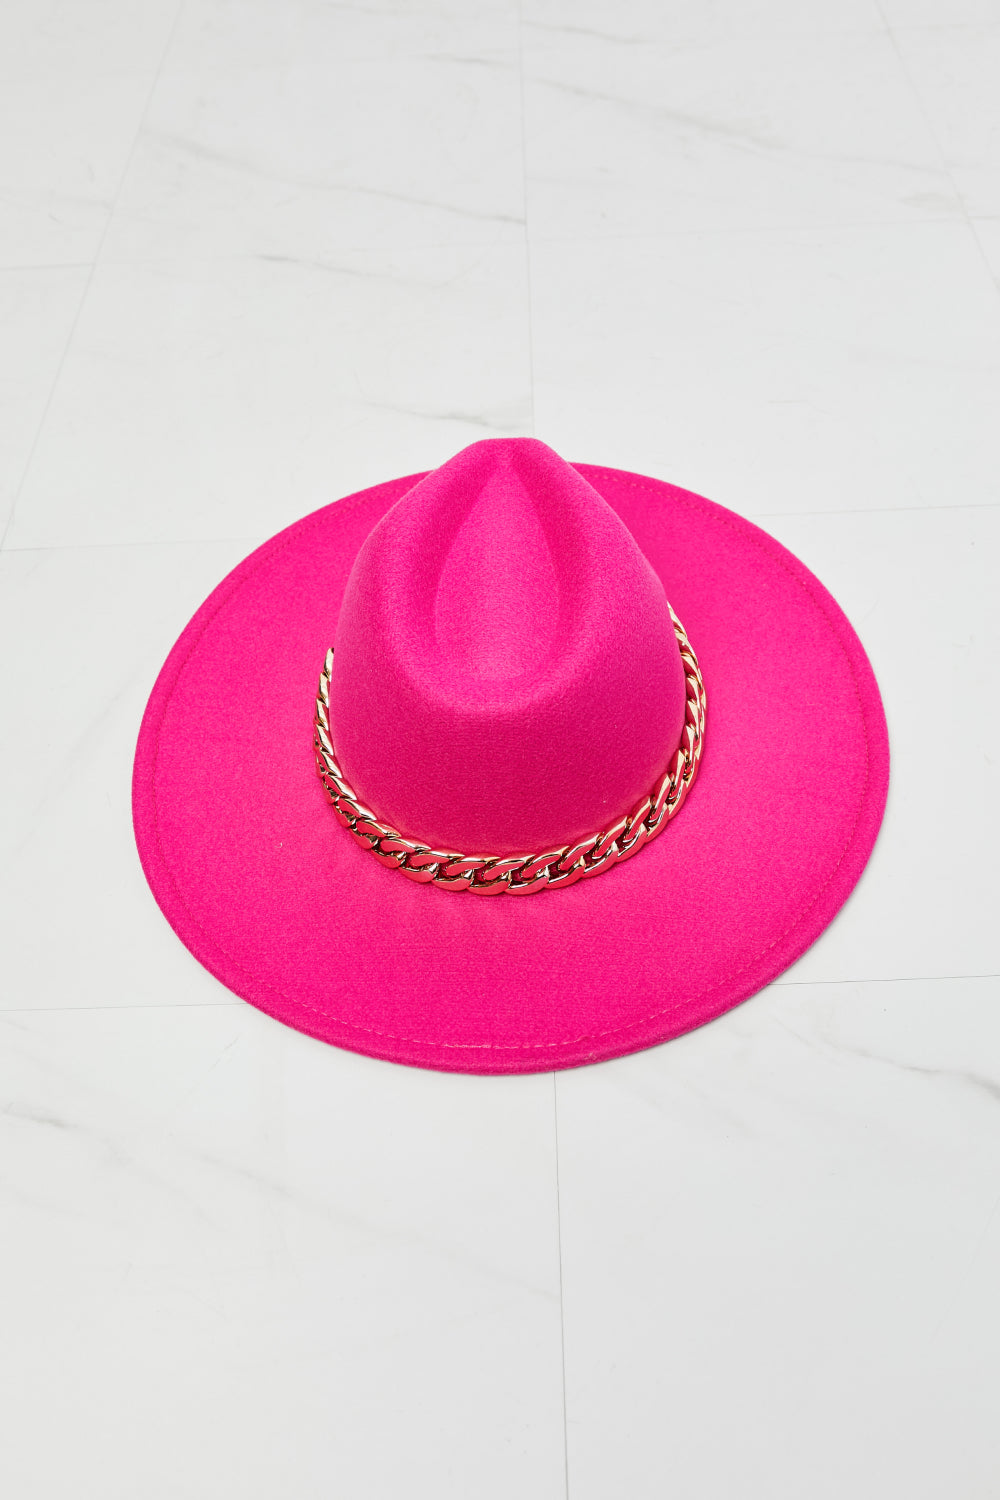 Fame Keep Your Promise Fedora Hat in Pink - AllIn Computer